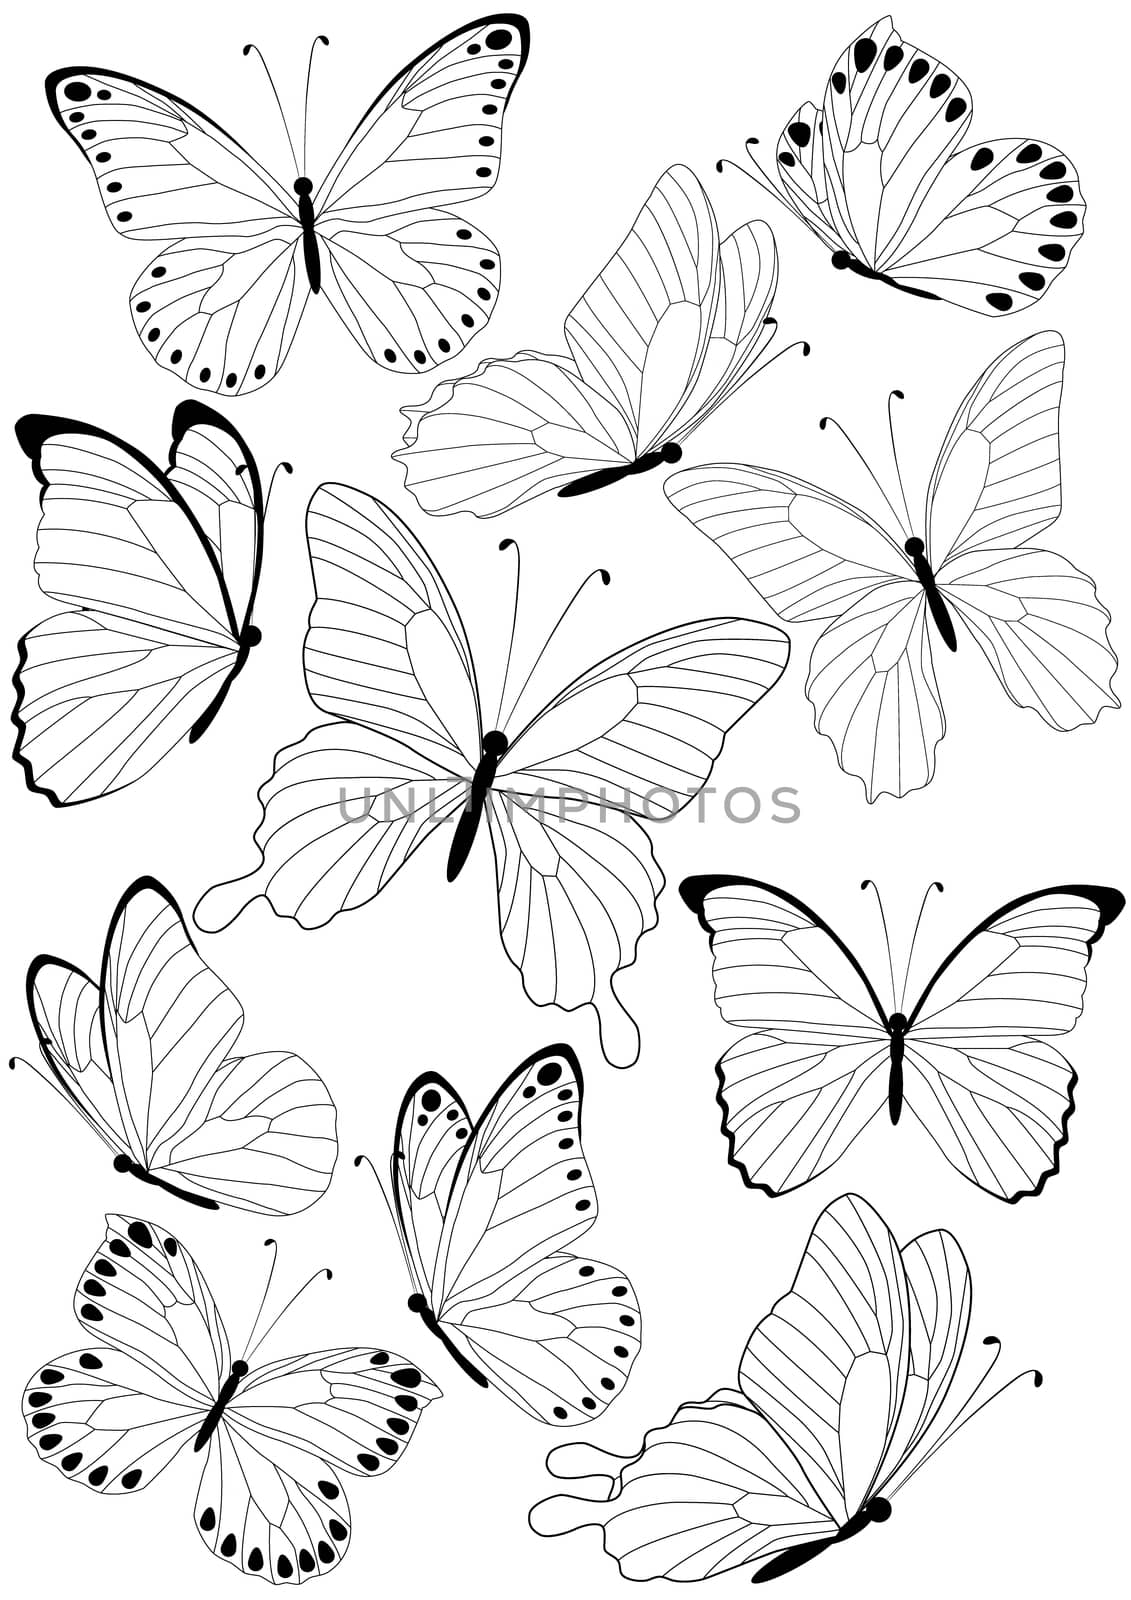 set of silhouette butterflies isolated on white background